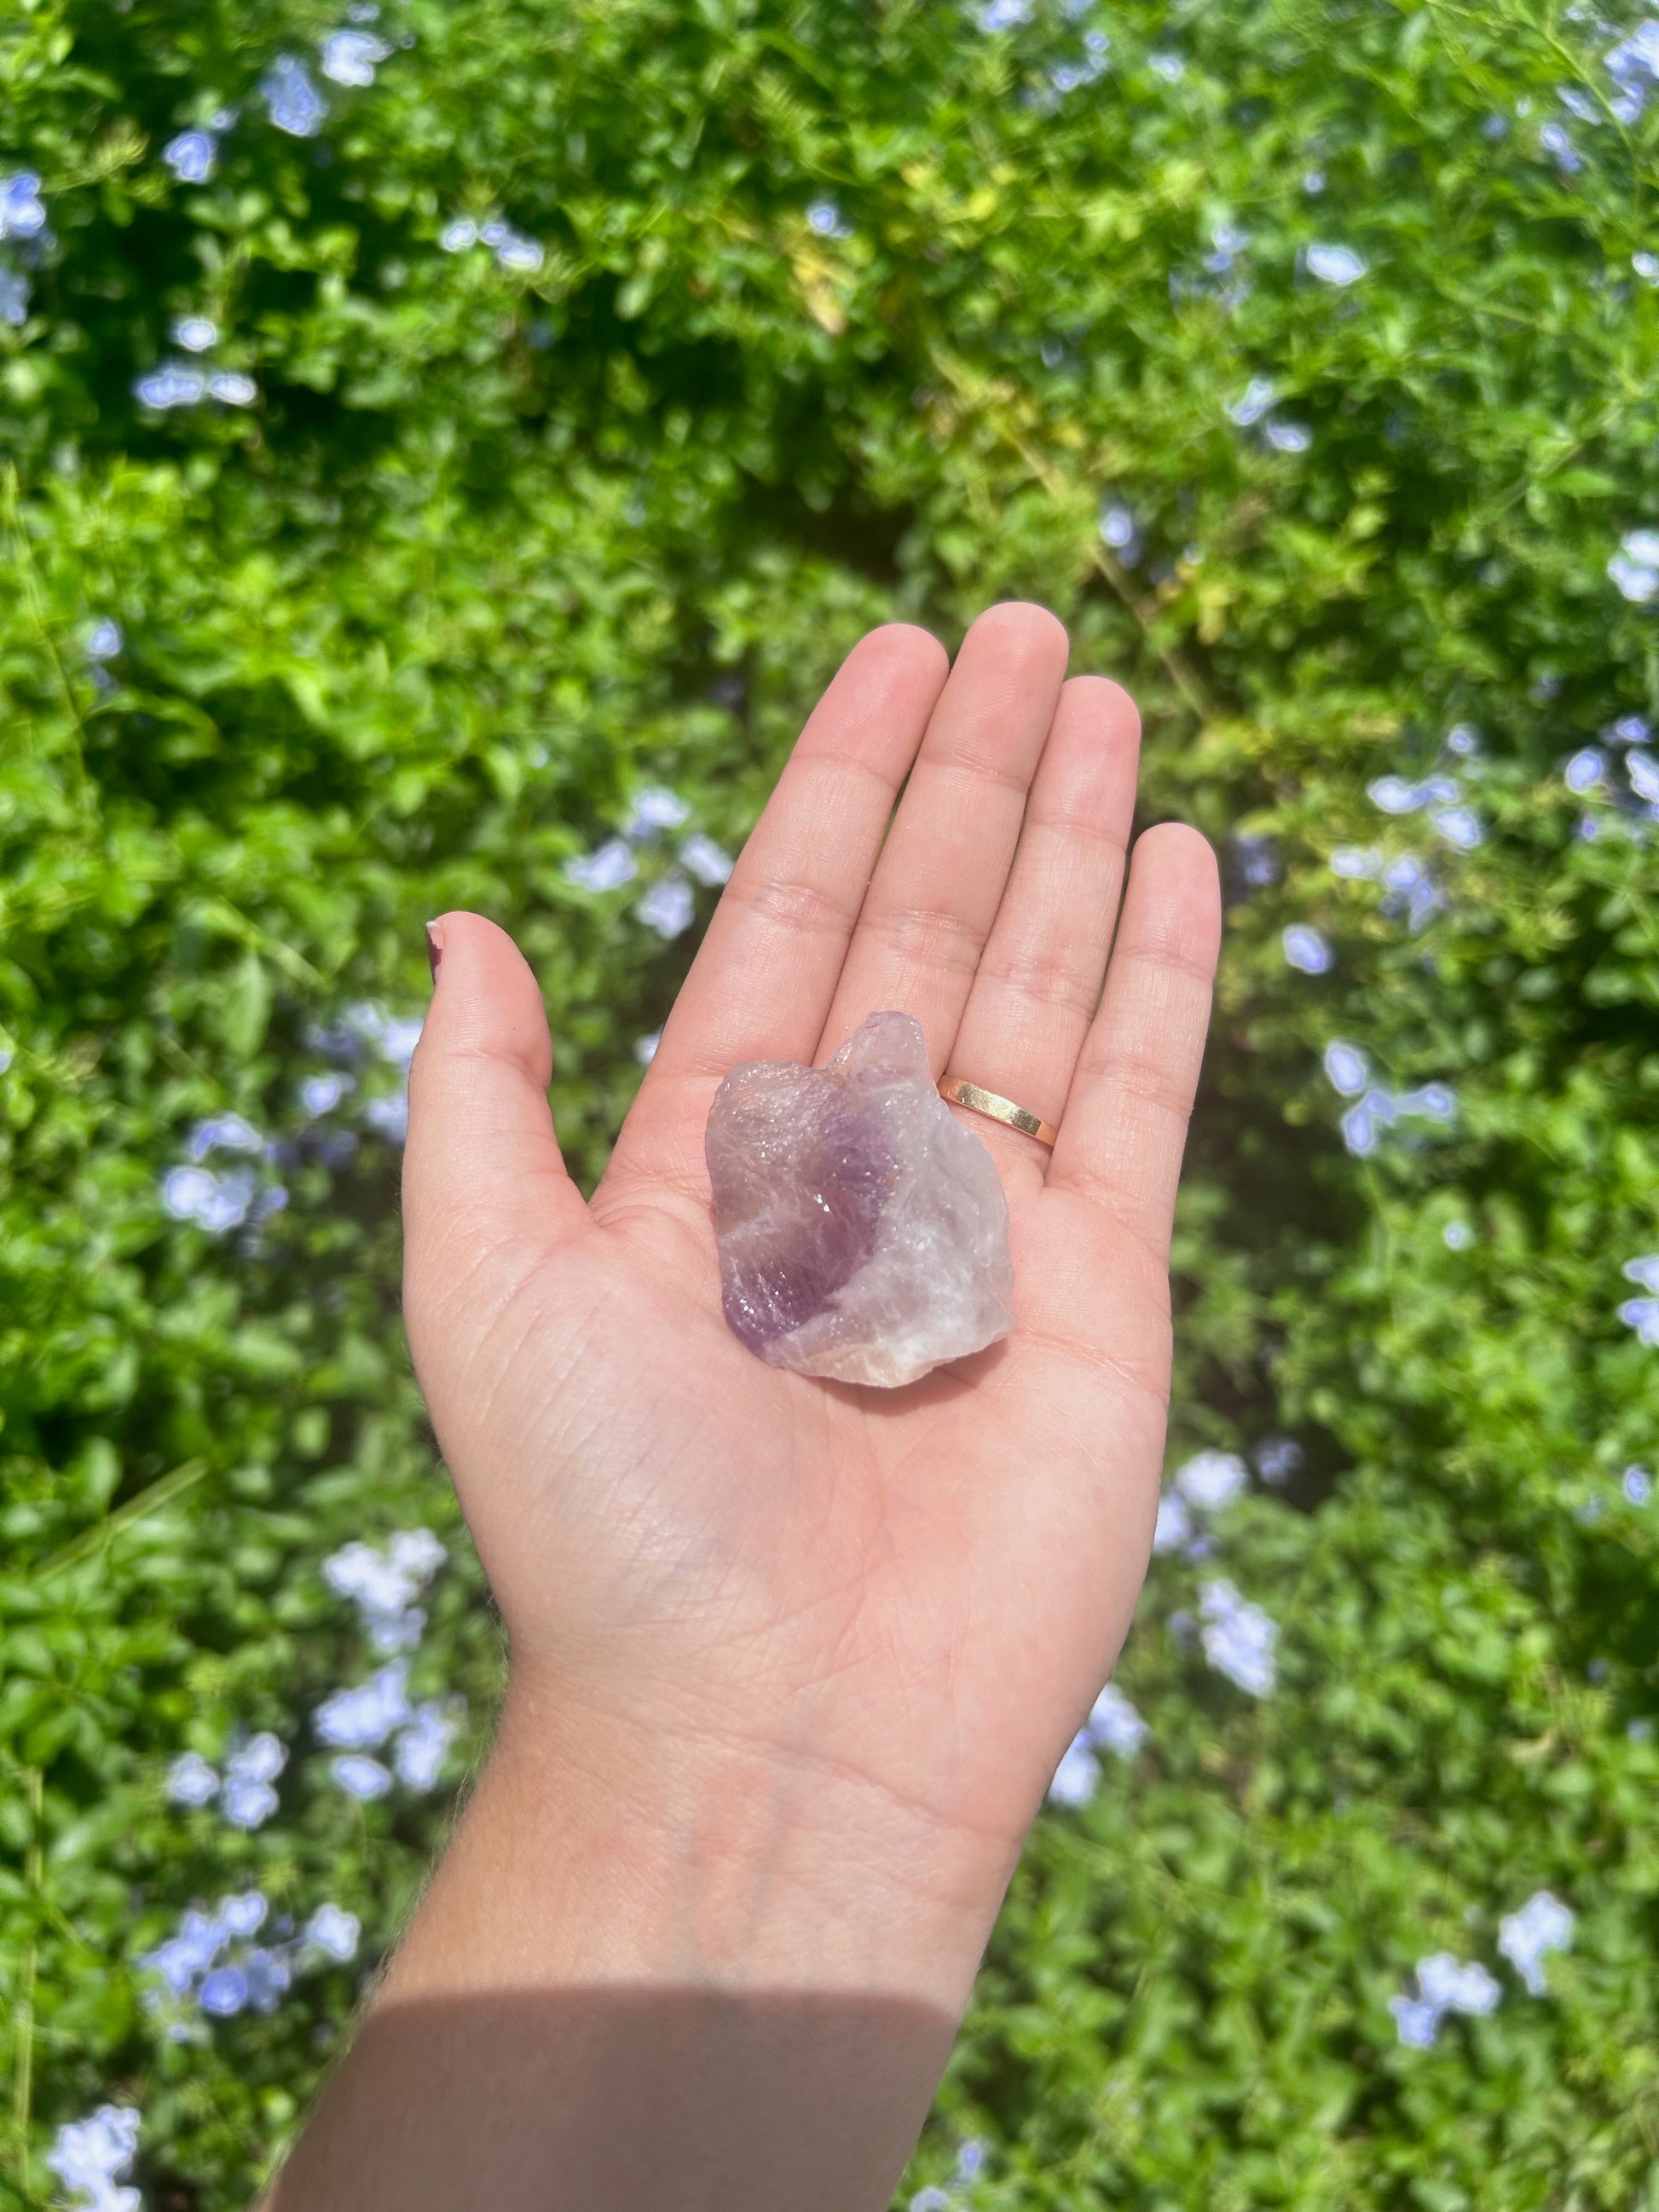 raw amethyst, 1.6 oz. Stone is posed outside in a hand with leaves and blue flowers in background.